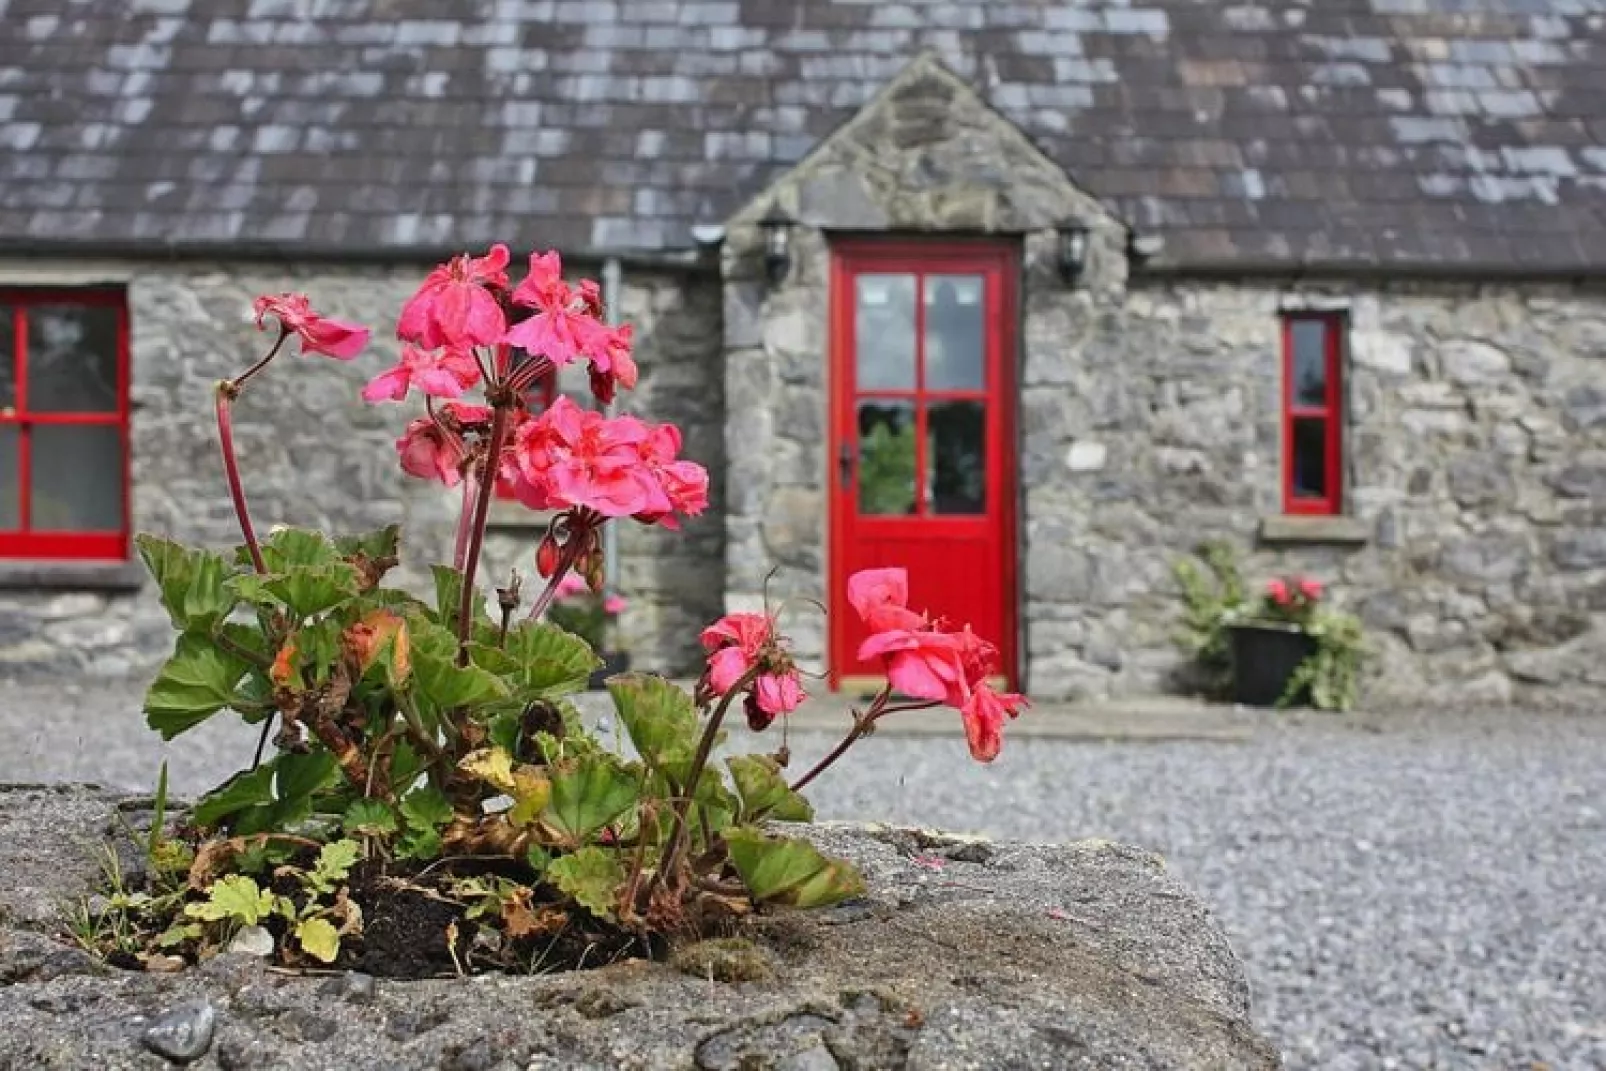 Lime Kiln Cottage Terryglass Co Tipperary-Buitenkant zomer